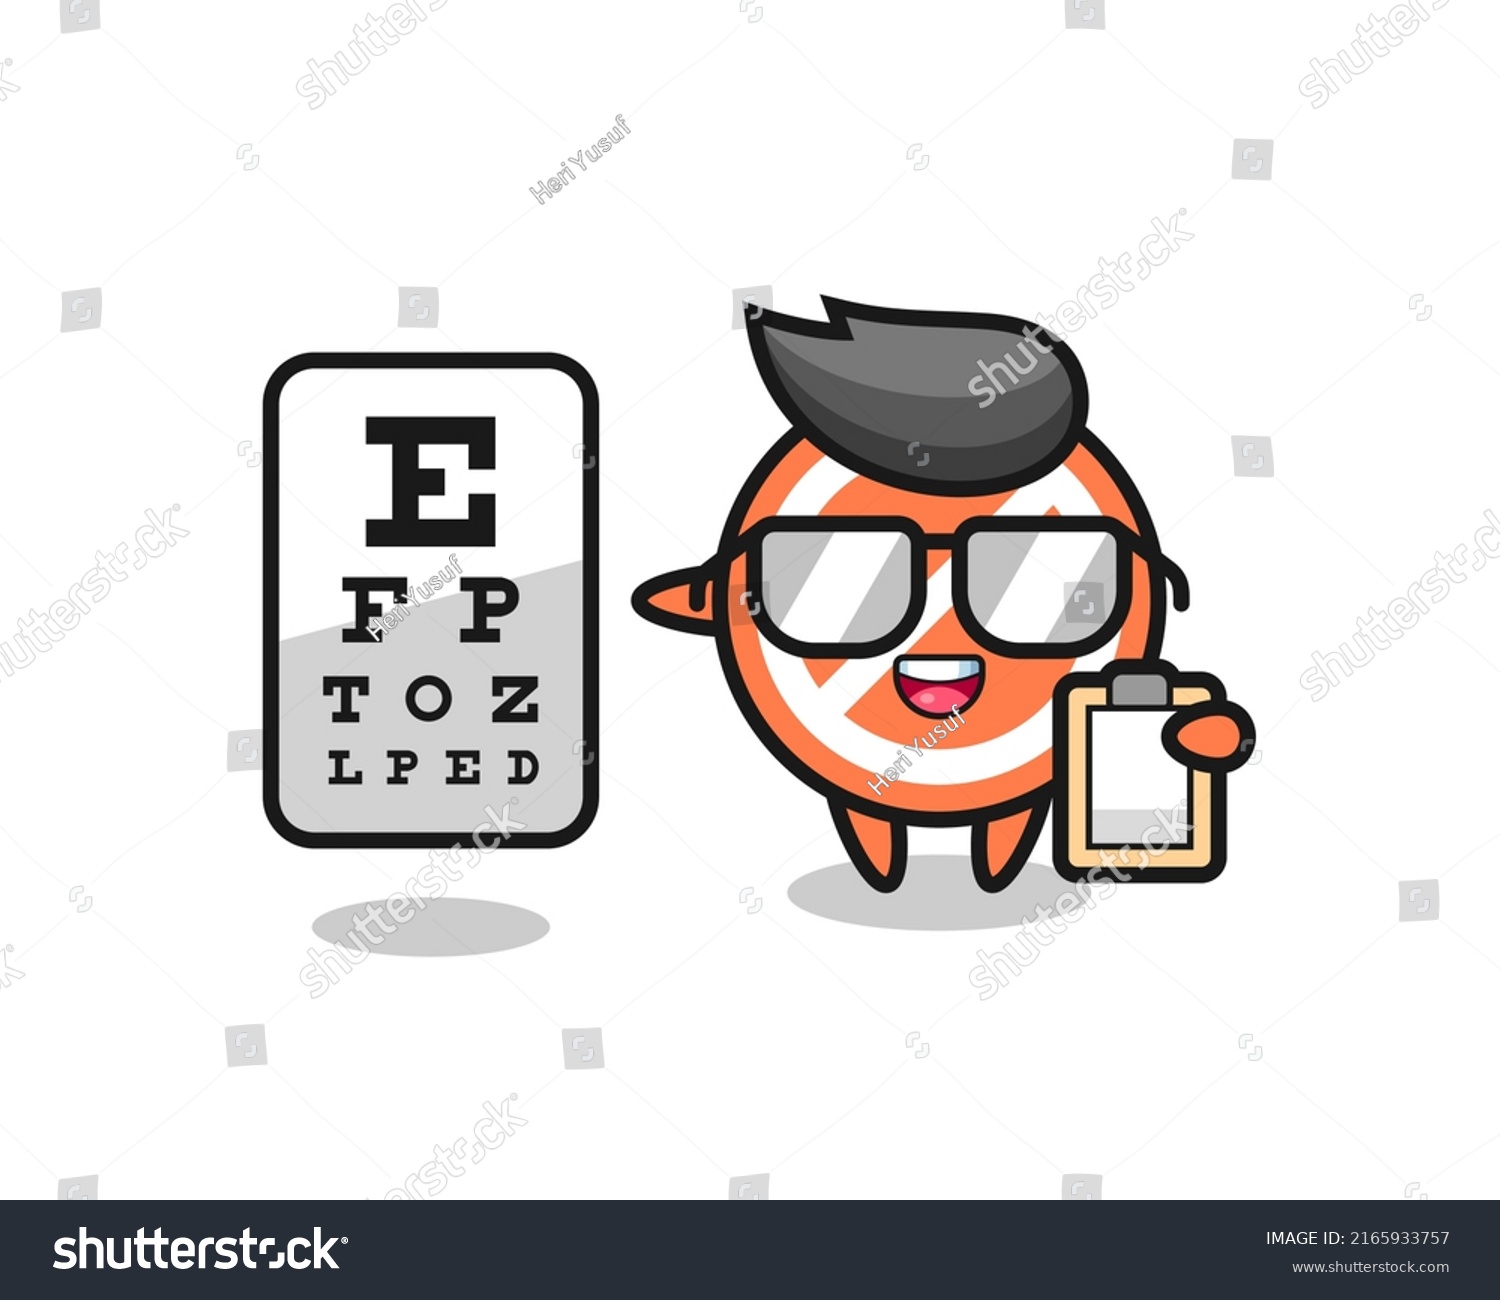 SVG of Illustration of stop sign mascot as an ophthalmology , cute style design for t shirt, sticker, logo element svg